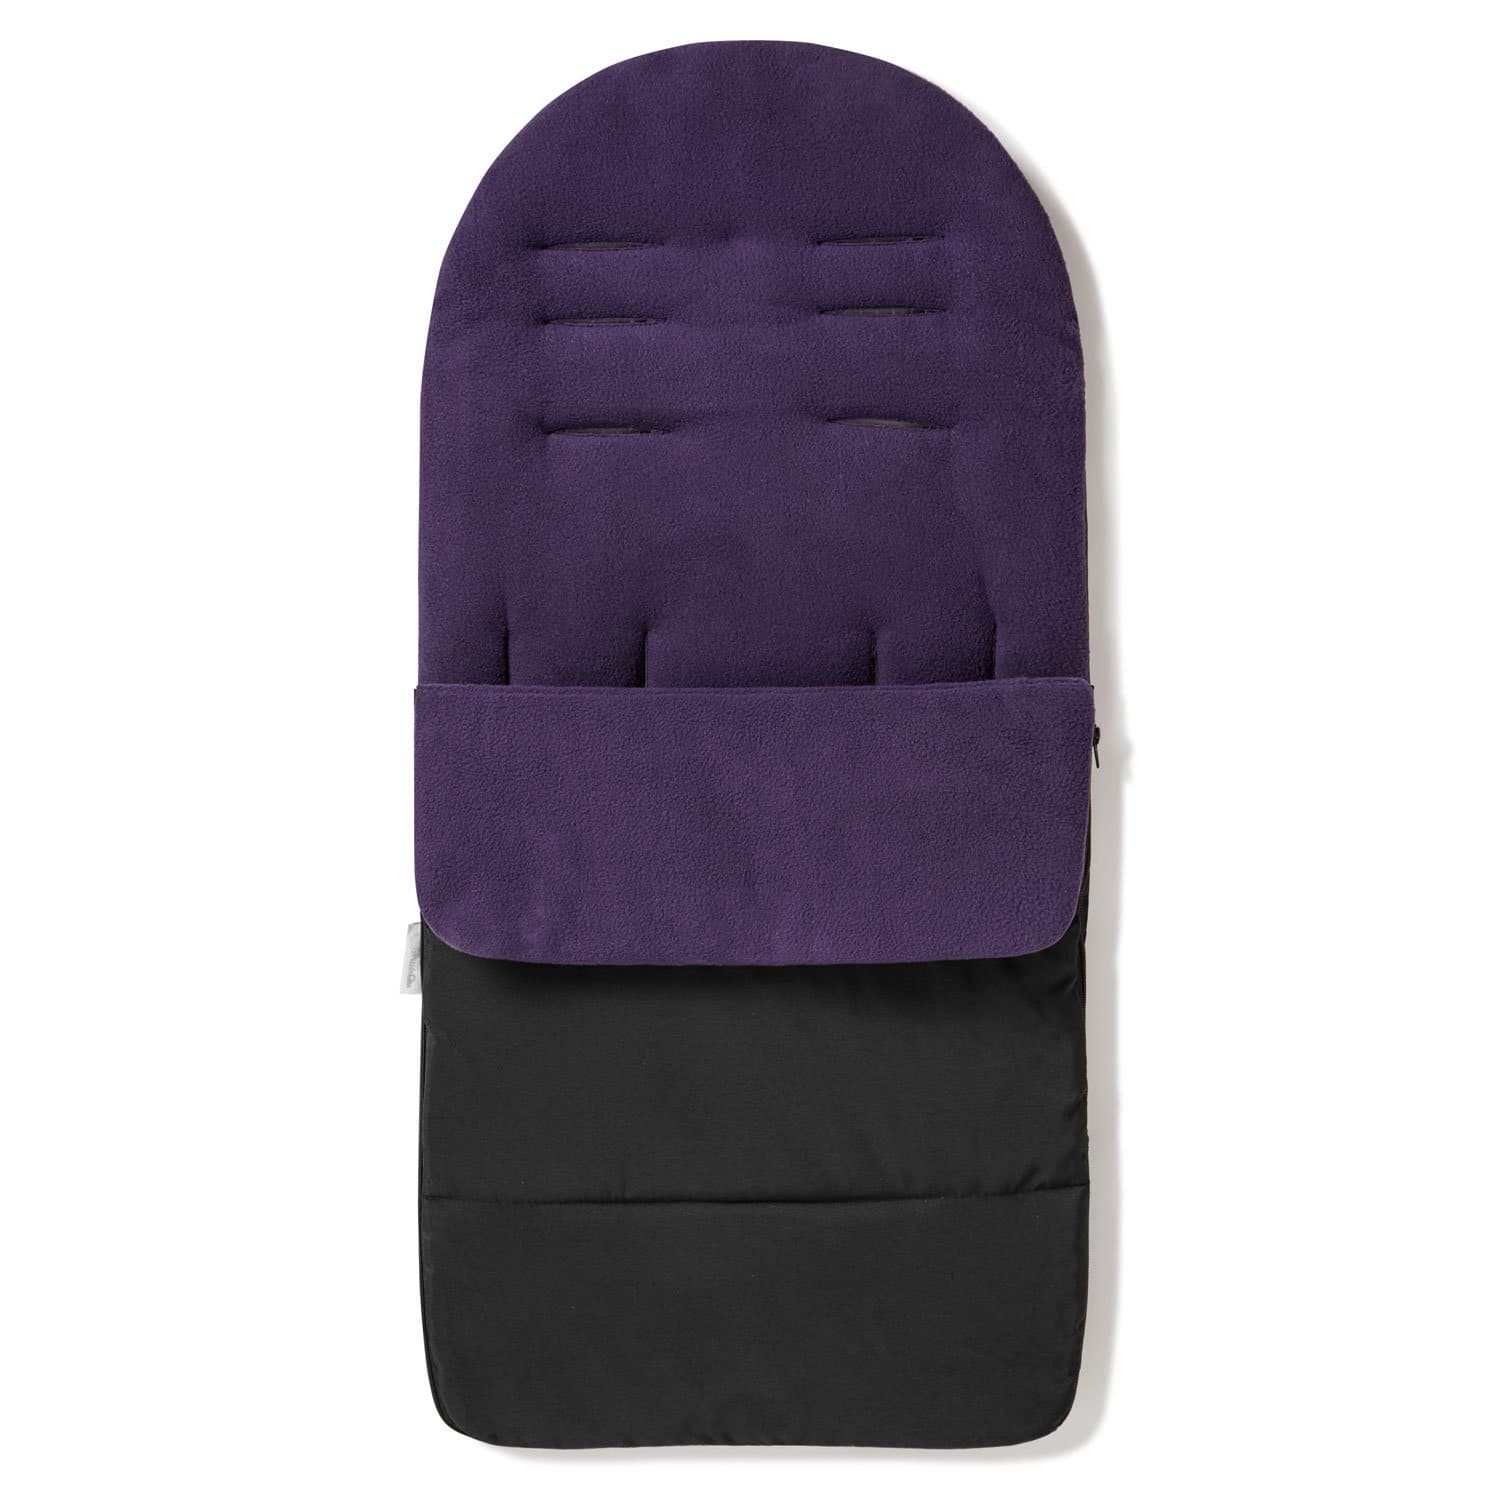 Premium Footmuff / Cosy Toes Compatible with Bebe Confort - Plum Purple / Fits All Models | For Your Little One